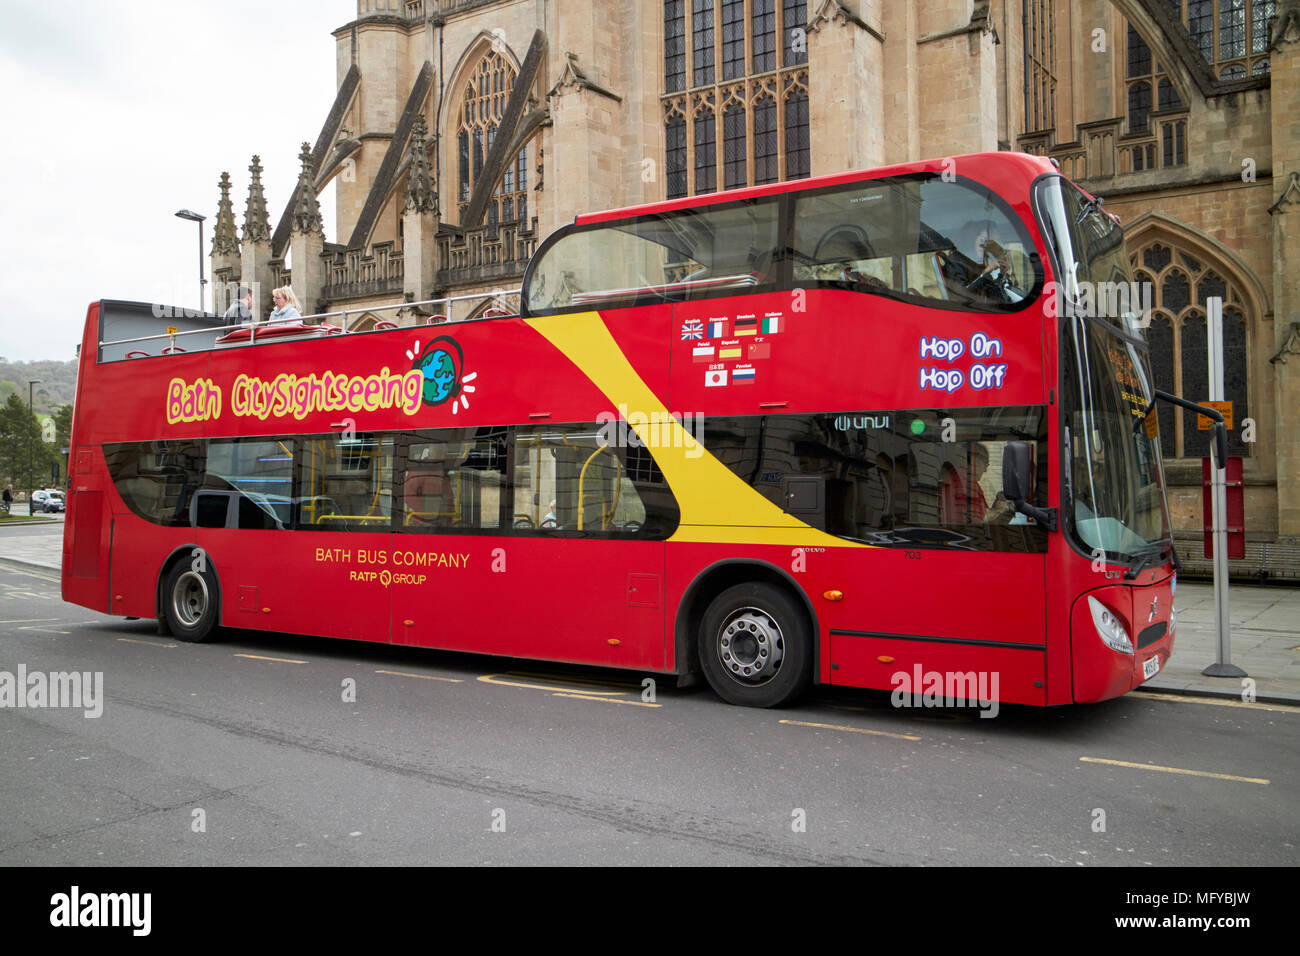 bath city sightseeing red double deck guided tour bus england uk Stock Photo